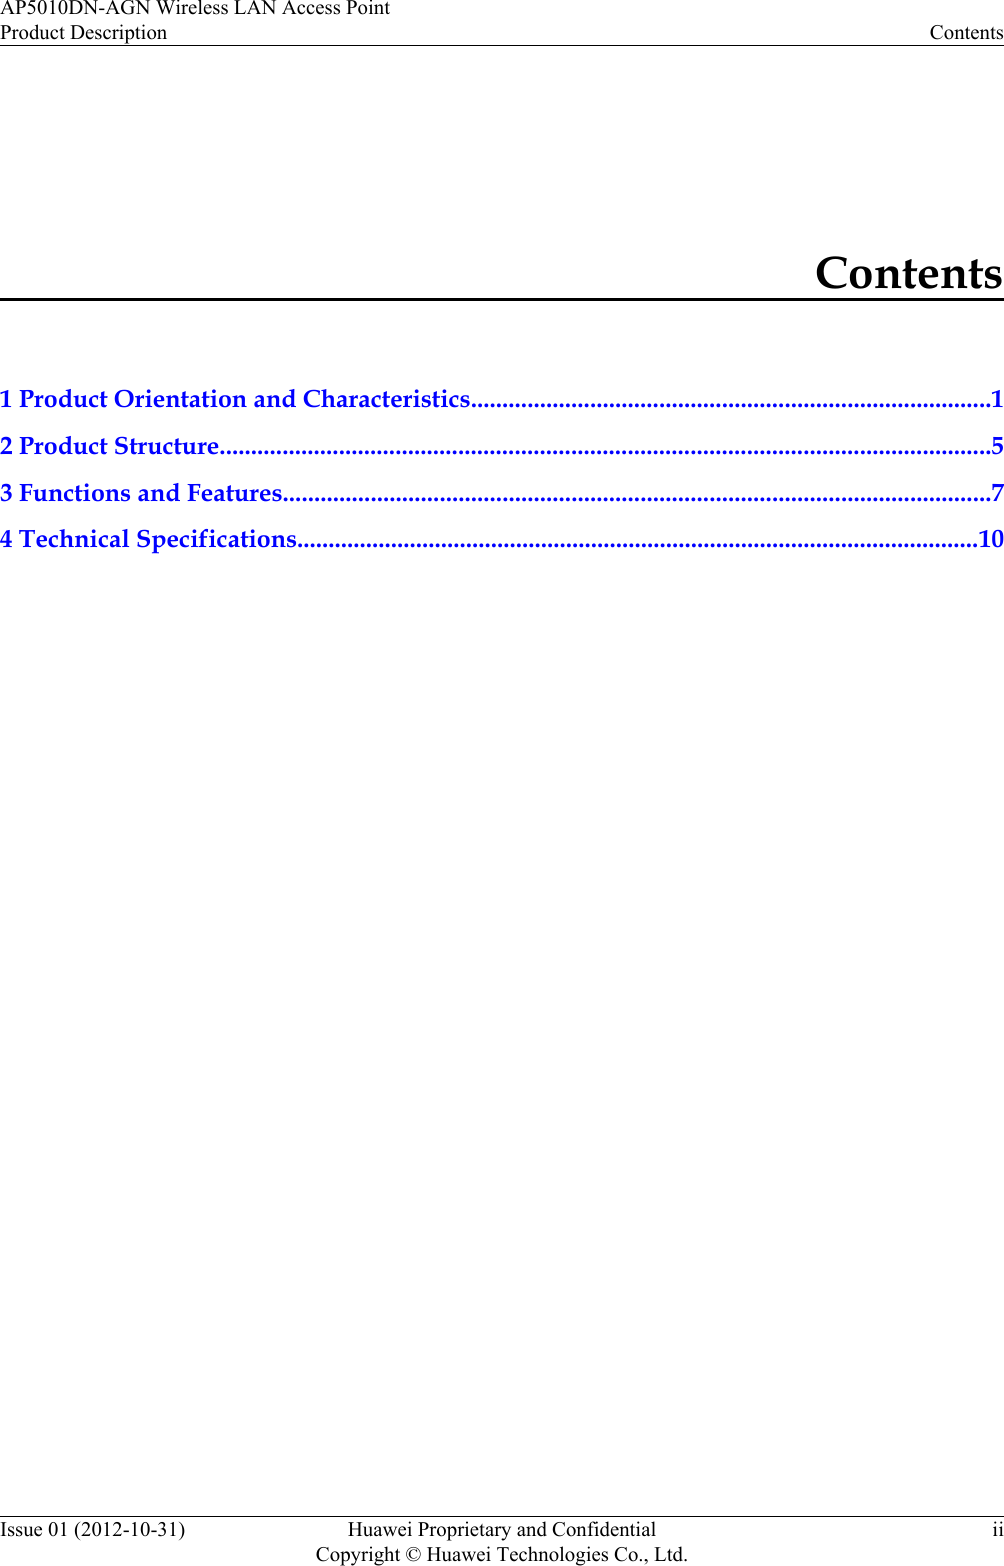 Contents1 Product Orientation and Characteristics...................................................................................12 Product Structure...........................................................................................................................53 Functions and Features.................................................................................................................74 Technical Specifications.............................................................................................................10AP5010DN-AGN Wireless LAN Access PointProduct Description ContentsIssue 01 (2012-10-31) Huawei Proprietary and ConfidentialCopyright © Huawei Technologies Co., Ltd.ii